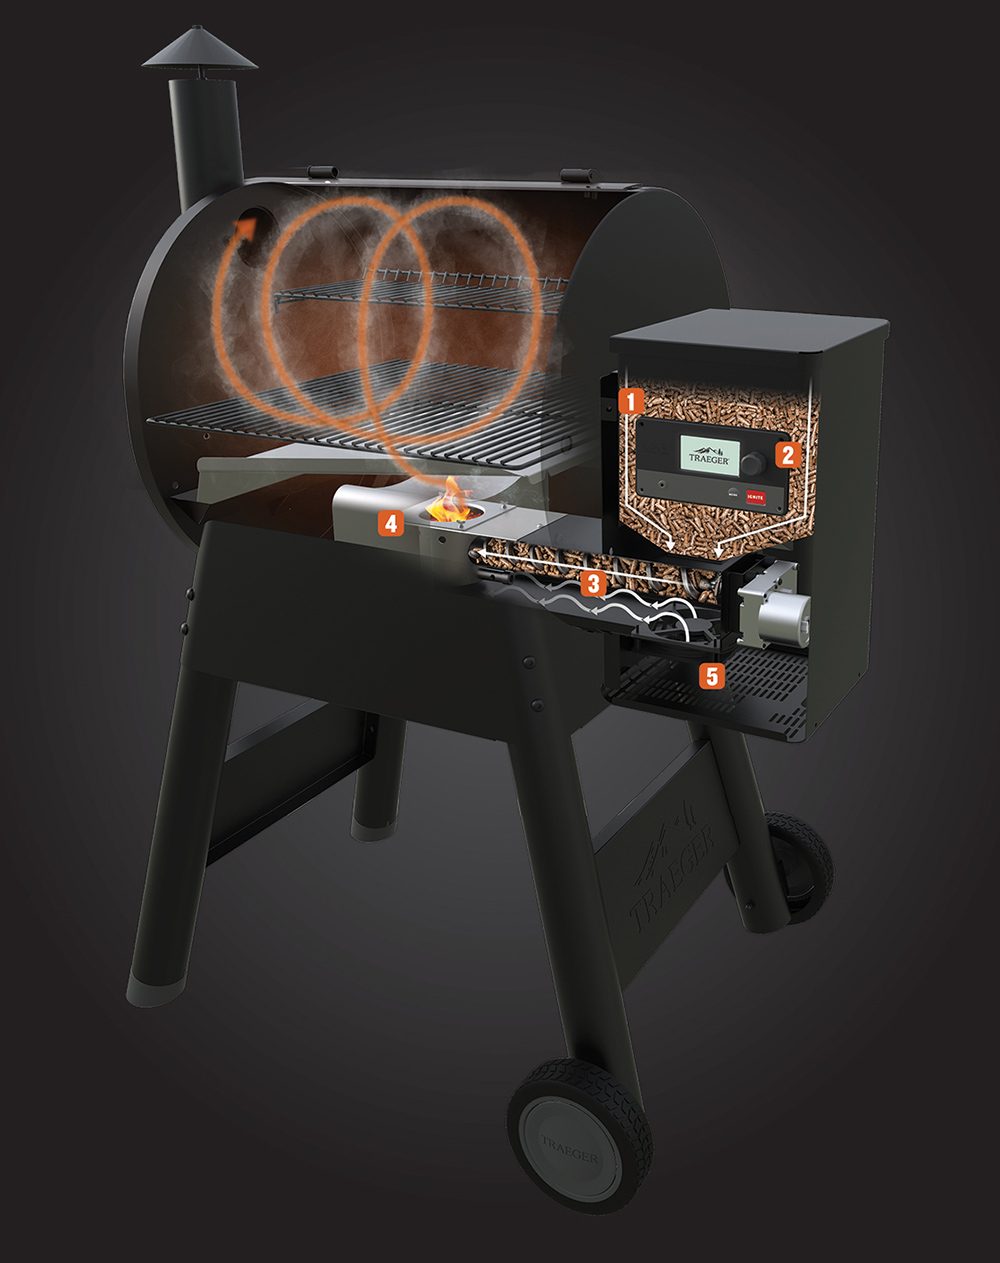 TRAEGER - How it work ?